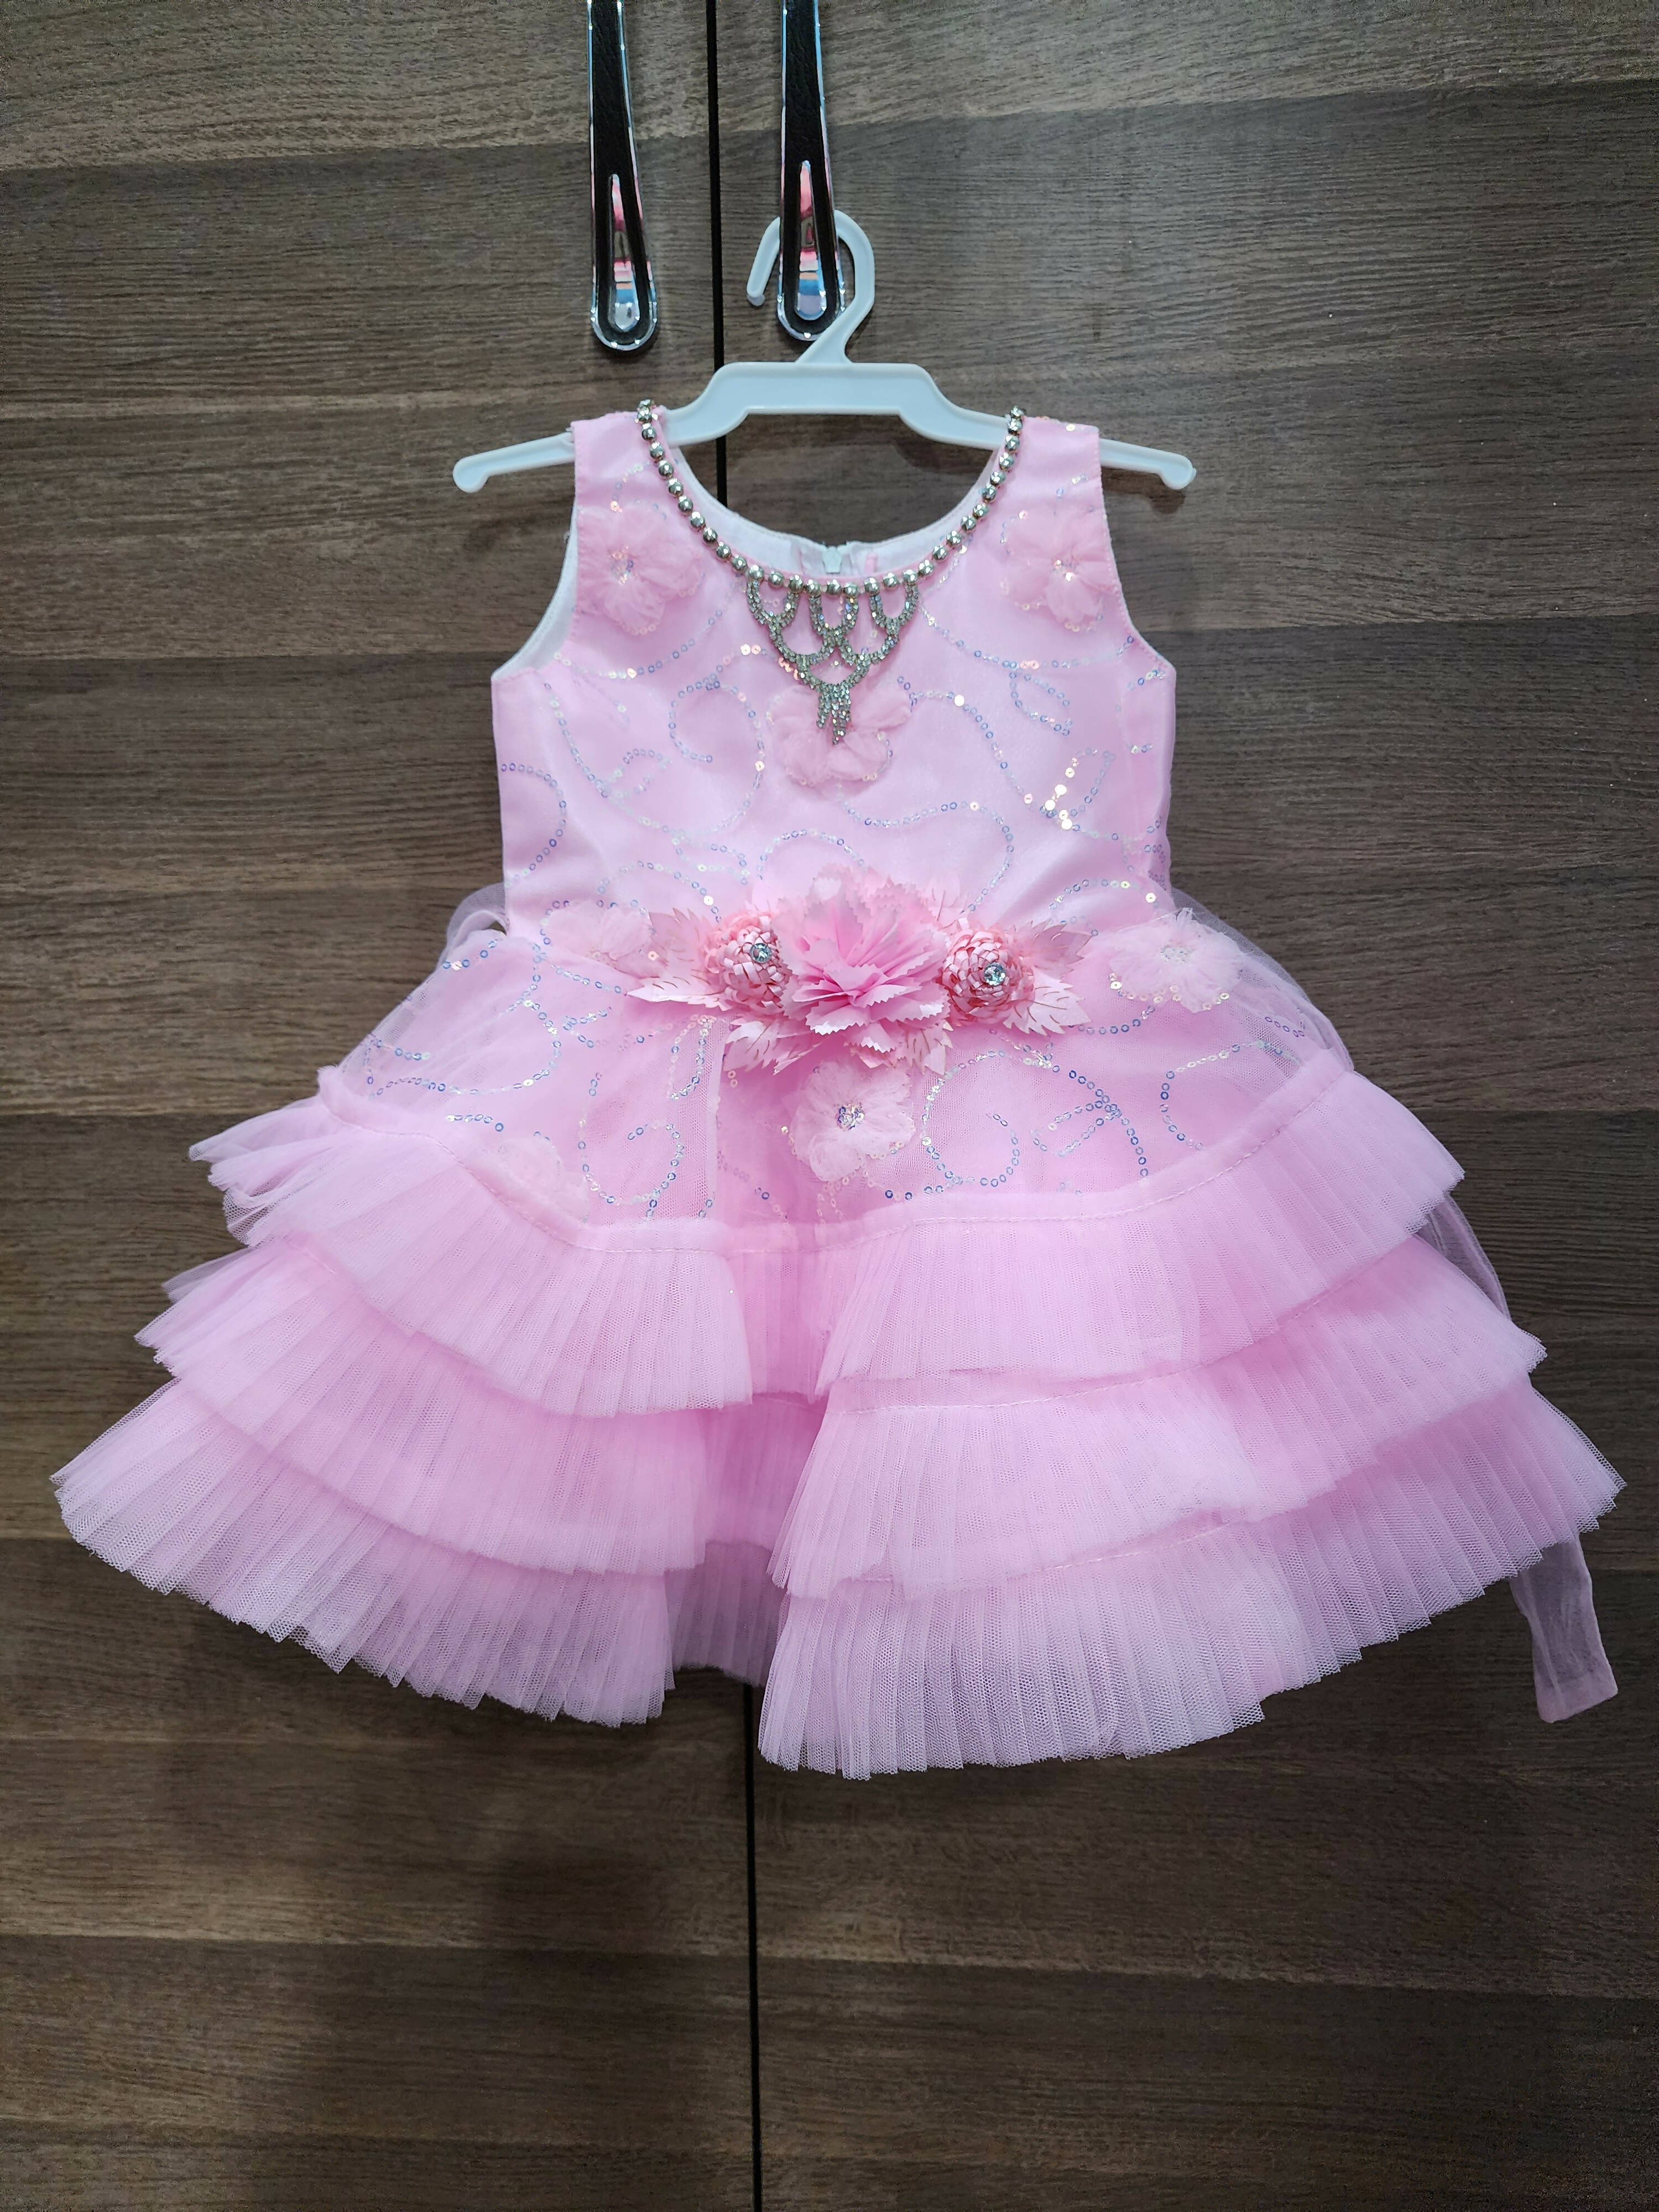 Pink princess frock - 1st Birthday Frock